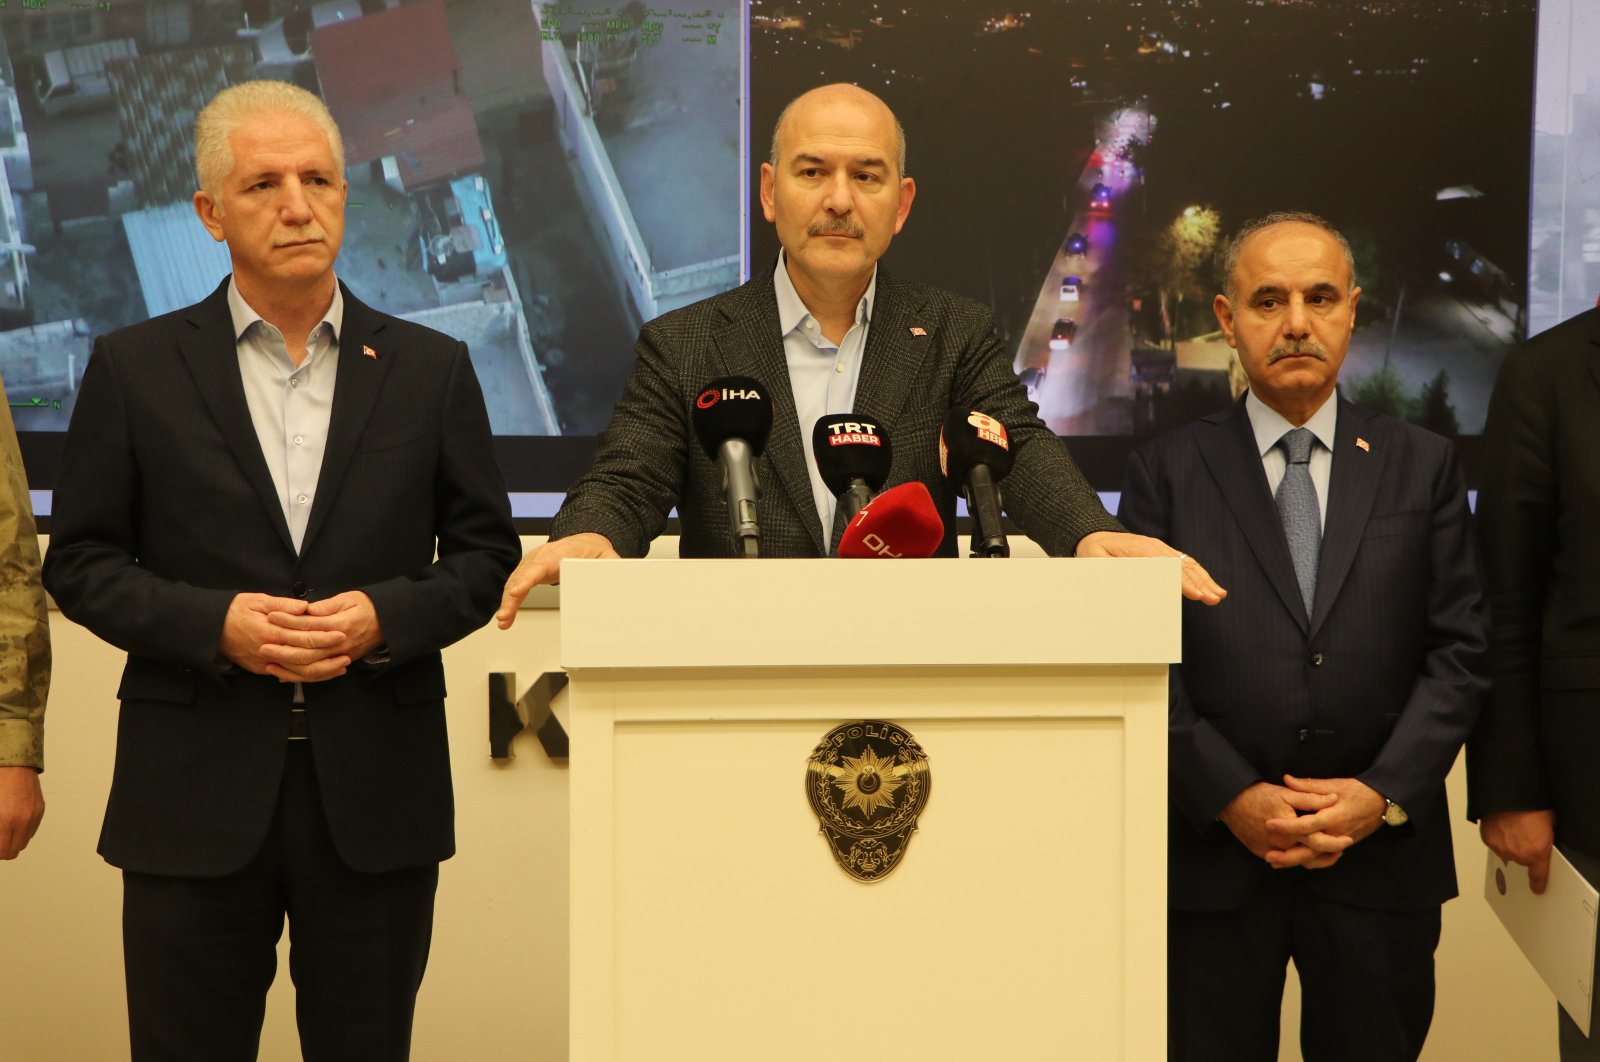 Interior Minister Süleyman Soylu (C) speaks at a news conference at the Gaziantep Provincial Security Directorate, accompanied by Chief of Police Mehmet Aktaş (R) and Gaziantep Governor Davut Gül, Gaziantep, Türkiye, April 13, 2023. (AA Photo)